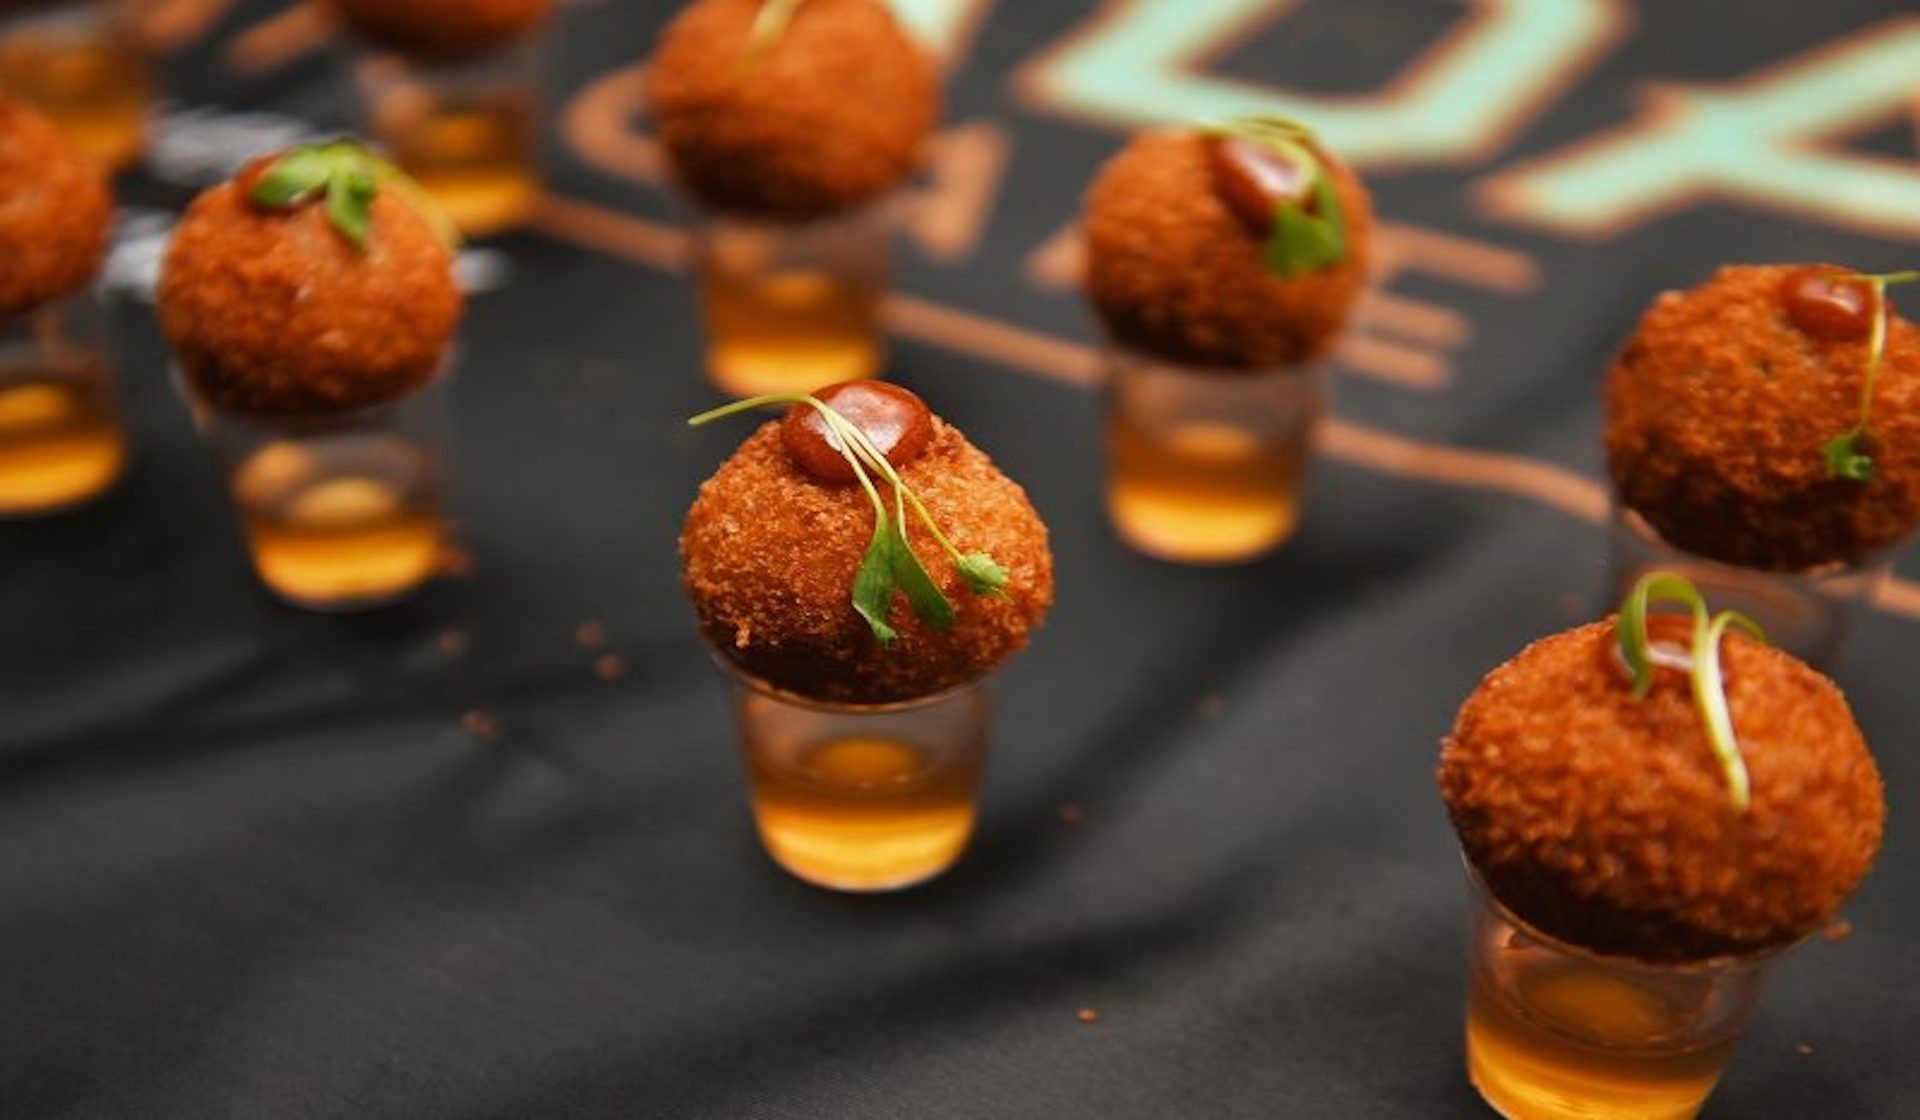 SOBEWFF Presents: Make It Miami: A 305-Inspired Tapas & Craft Cocktail Party